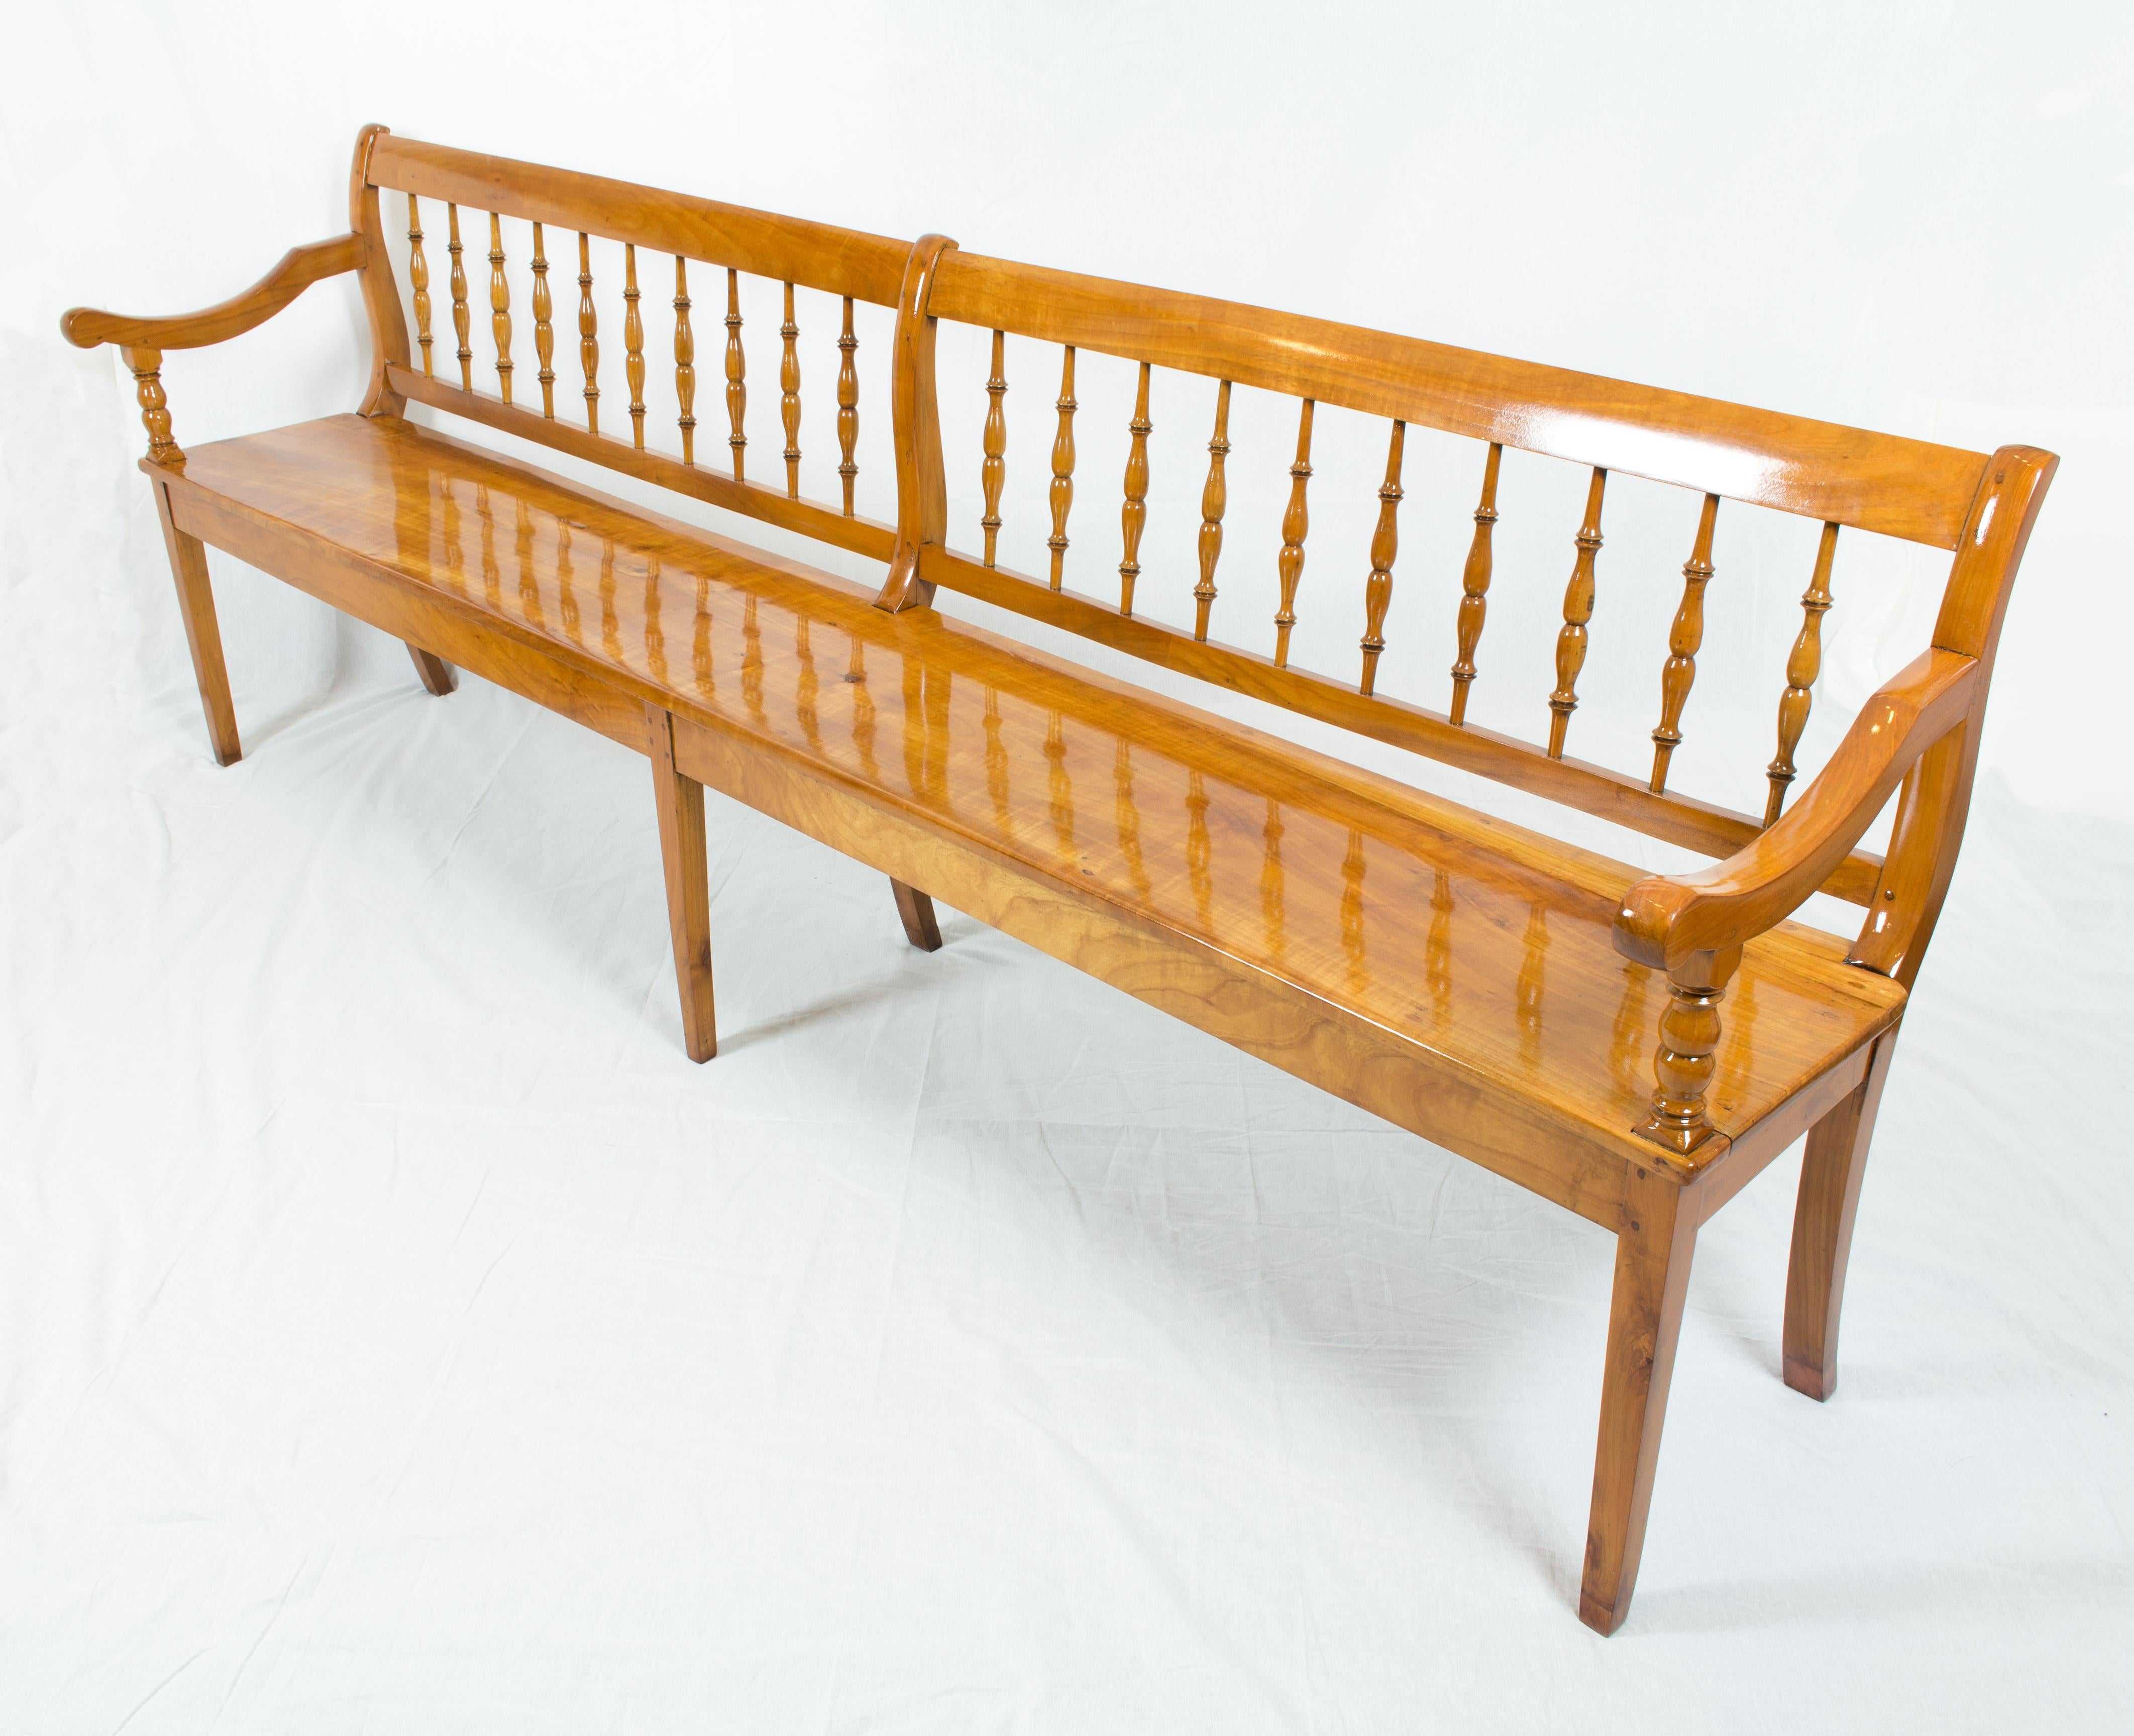 Extremely rare seat bench from the time of the late Biedermeier. 
Made of solid cherrywood. 
The bench is unbelievable 243 cm wide! 
In very good restored condition.